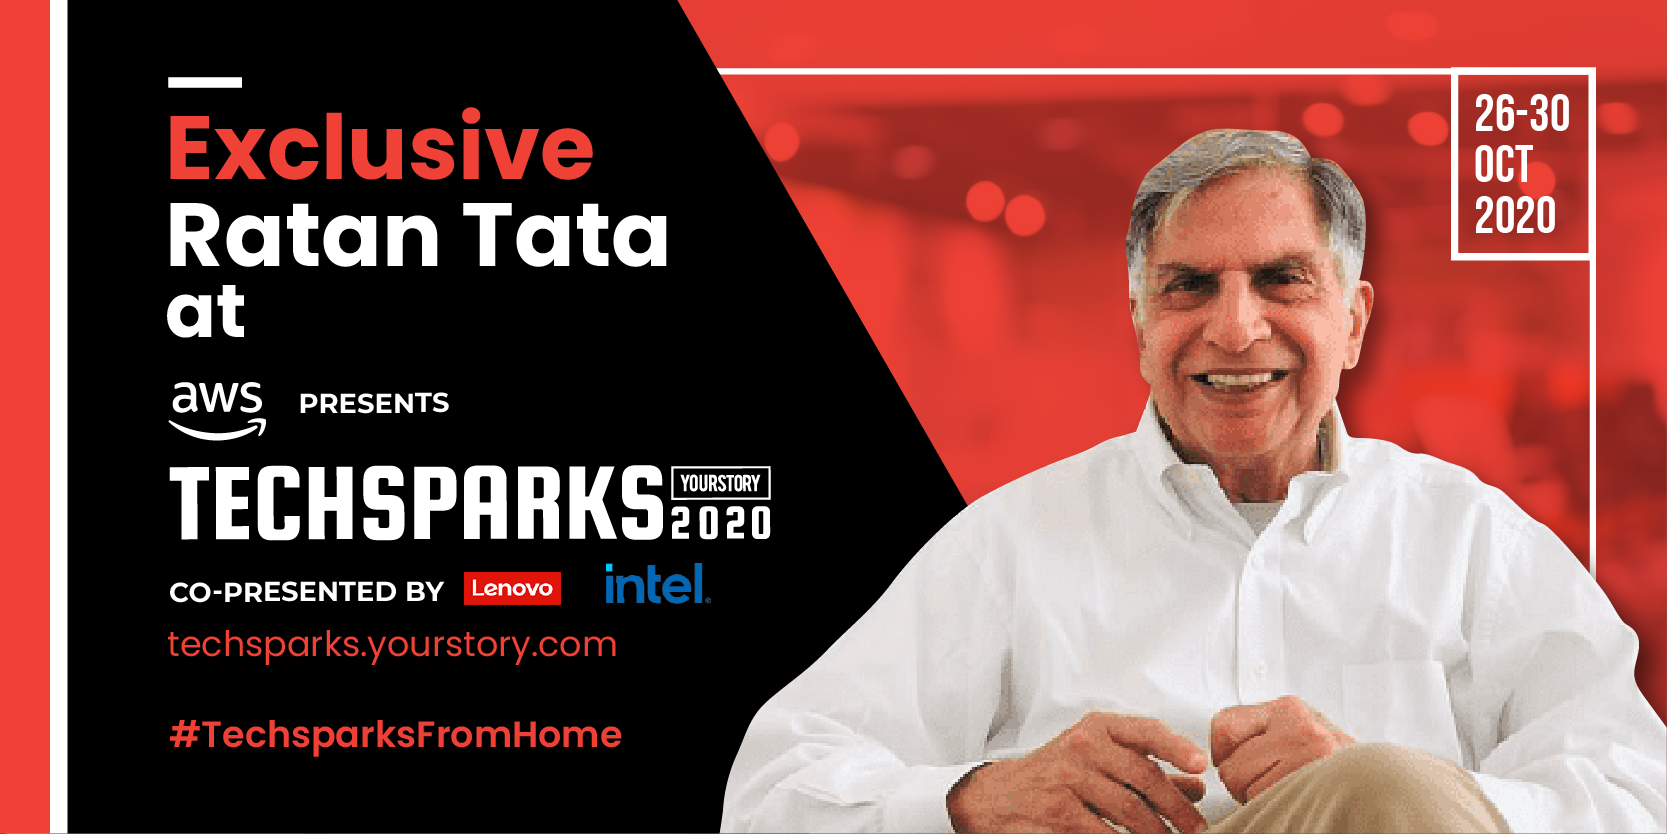 Ratan Tata delivers a deeply poignant and timeless message in his closing keynote at YourStory’s TechSparks 2020